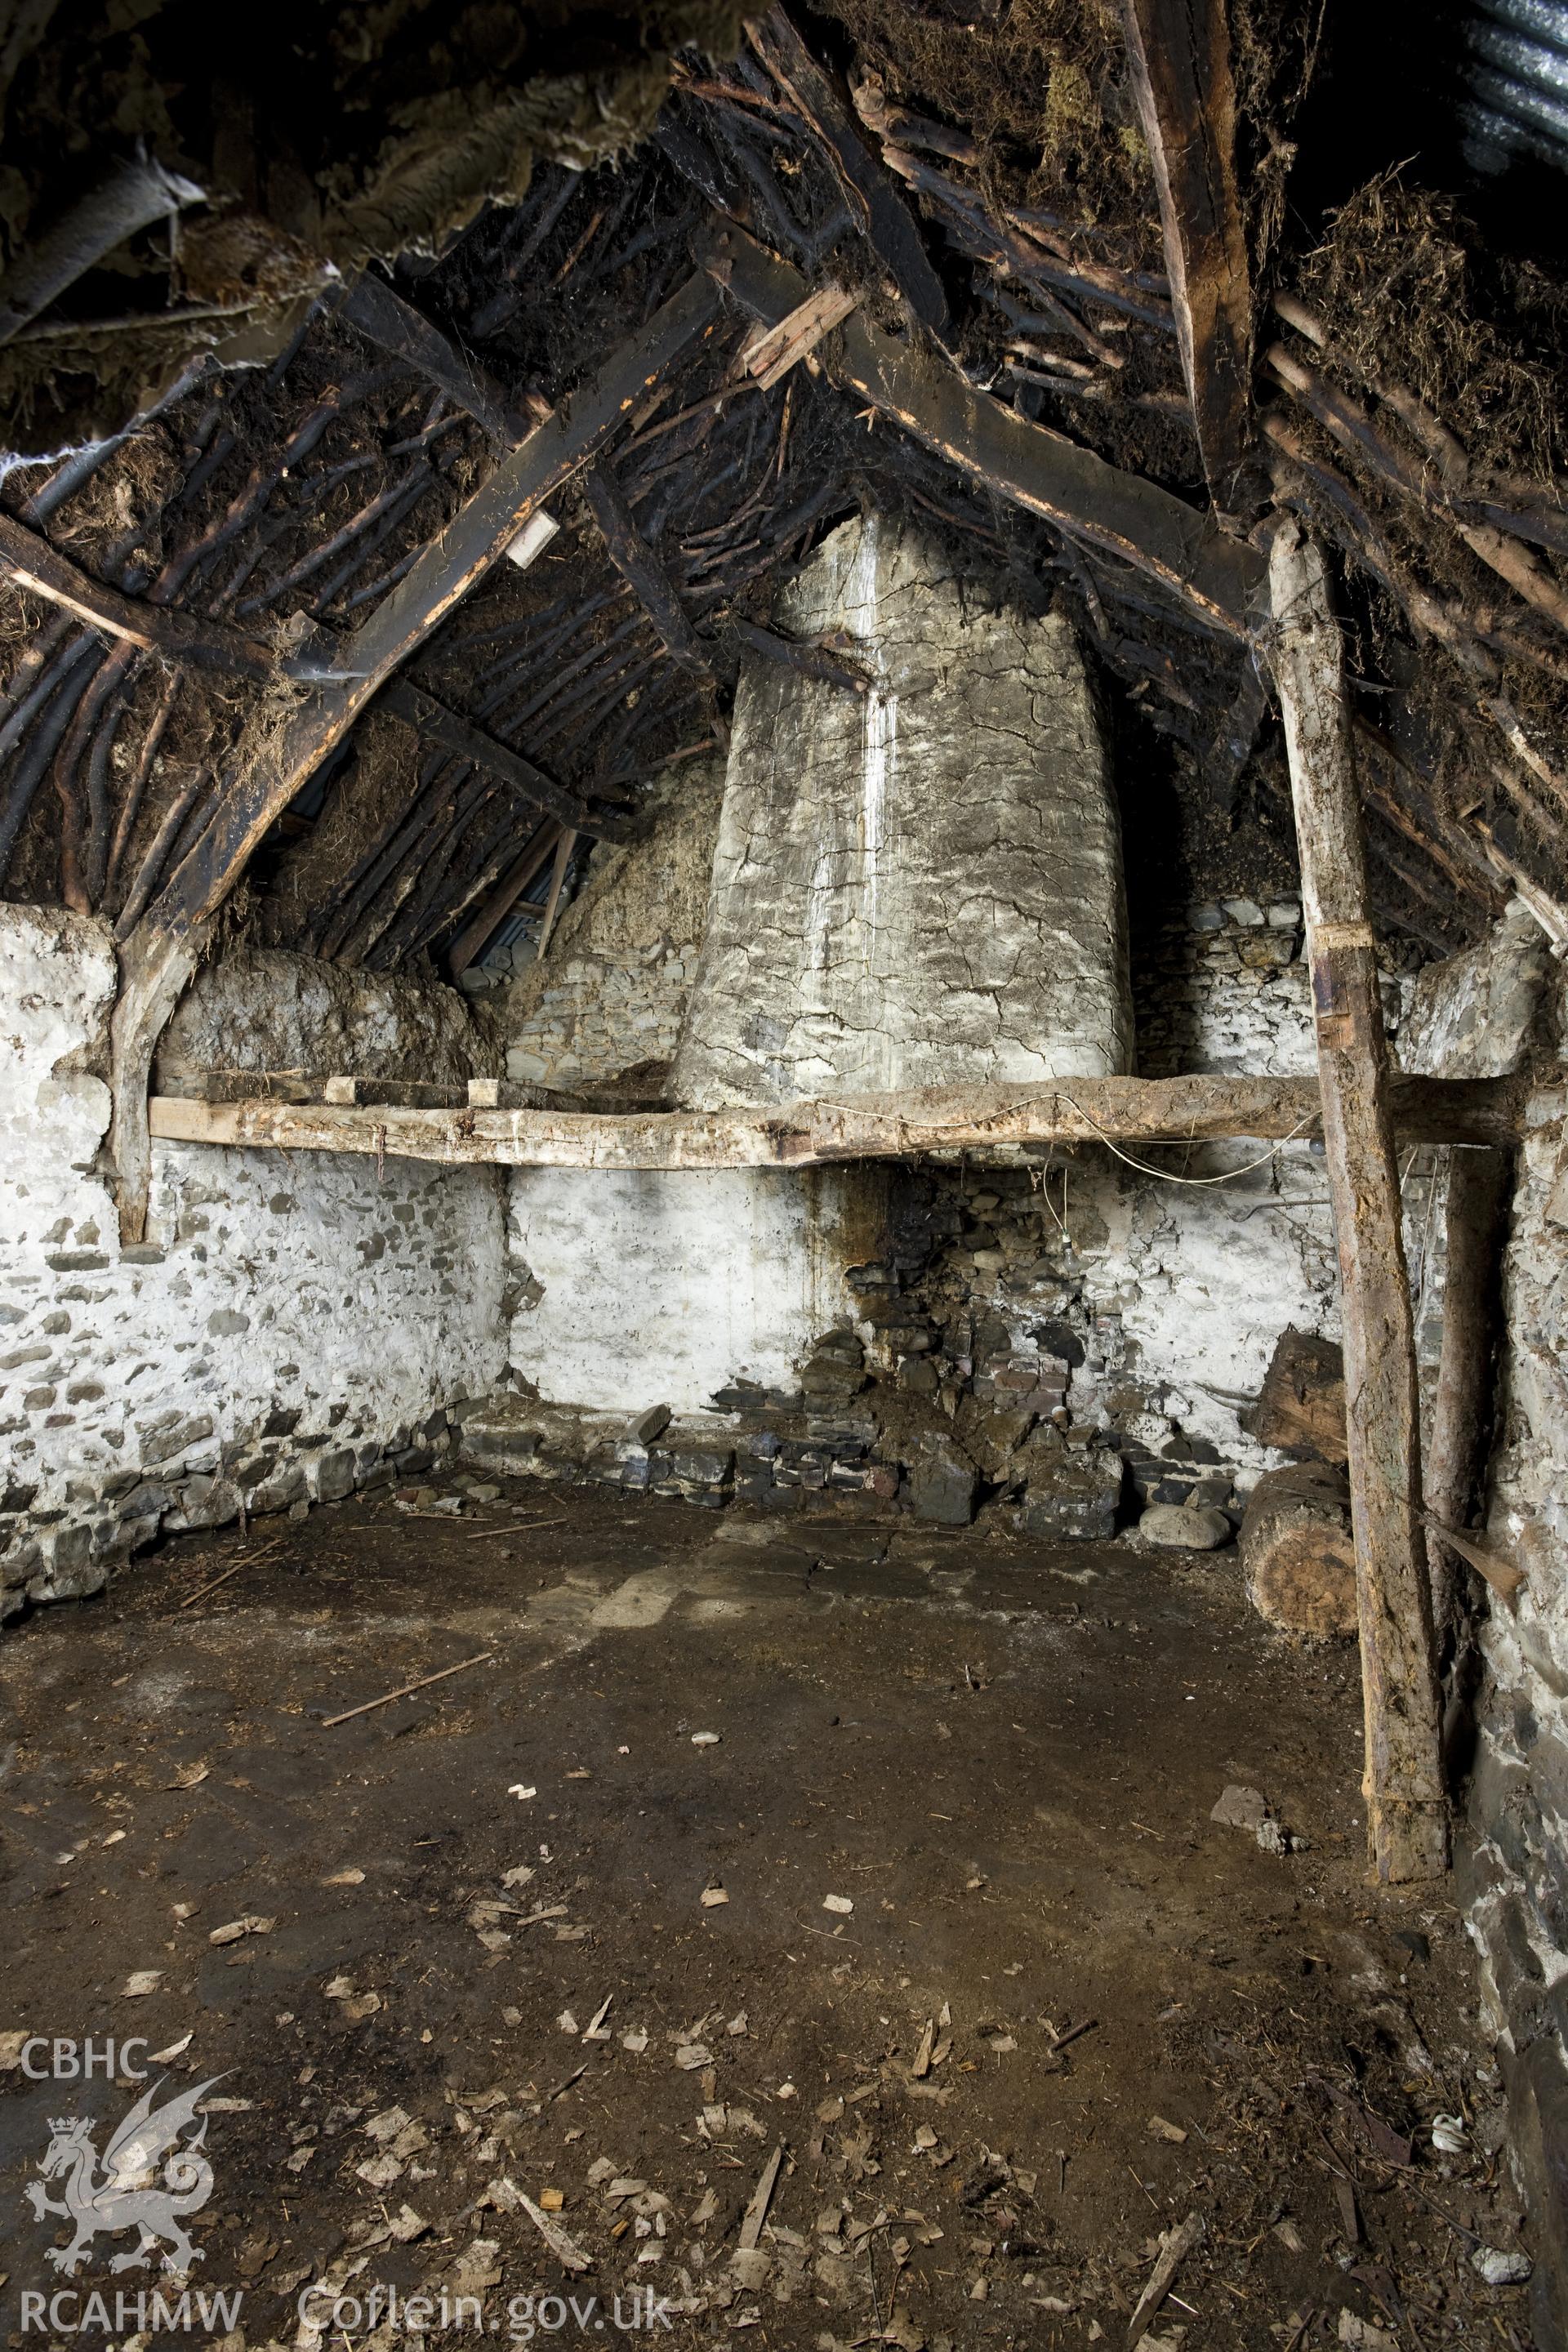 Interior view of Wigwen Fach showing the wicker fireplace hood.